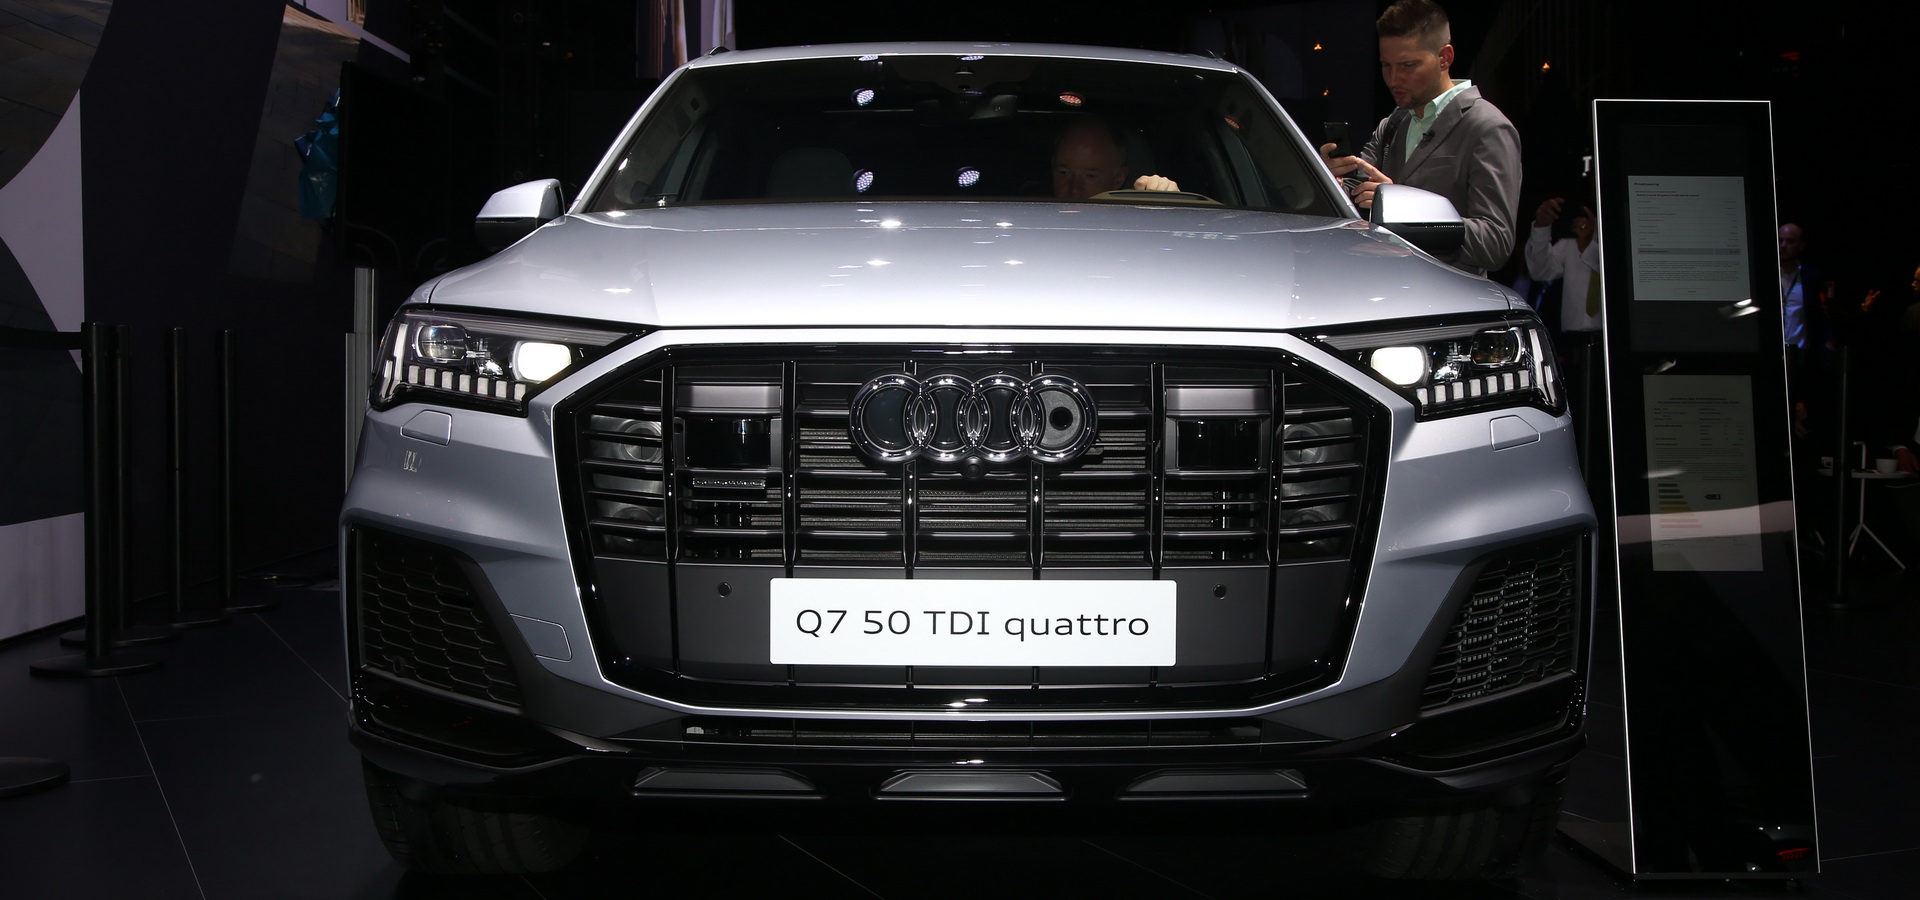 Facelift Brings 2020 Audi Q7 In Line With The Rest Of The